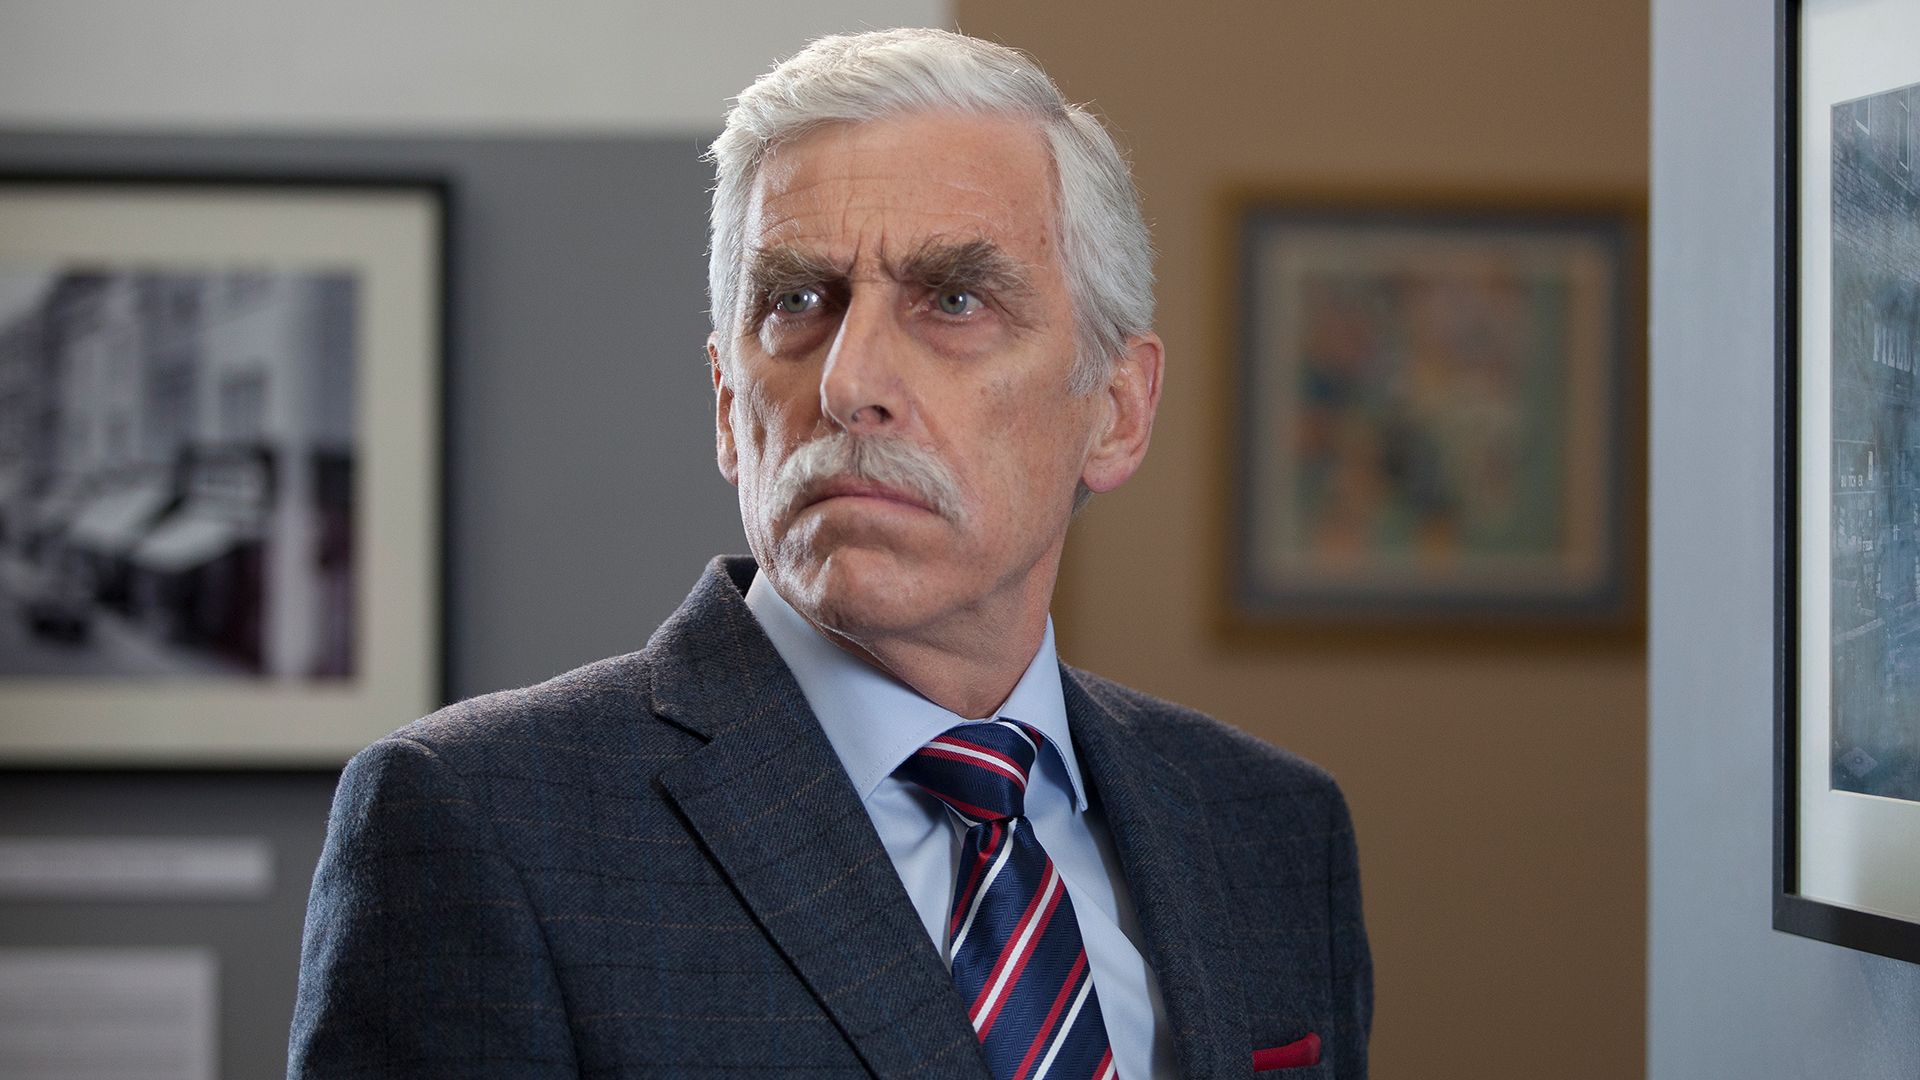 Terrence Hardiman wearing a suit in an episode of Agatha Raisin